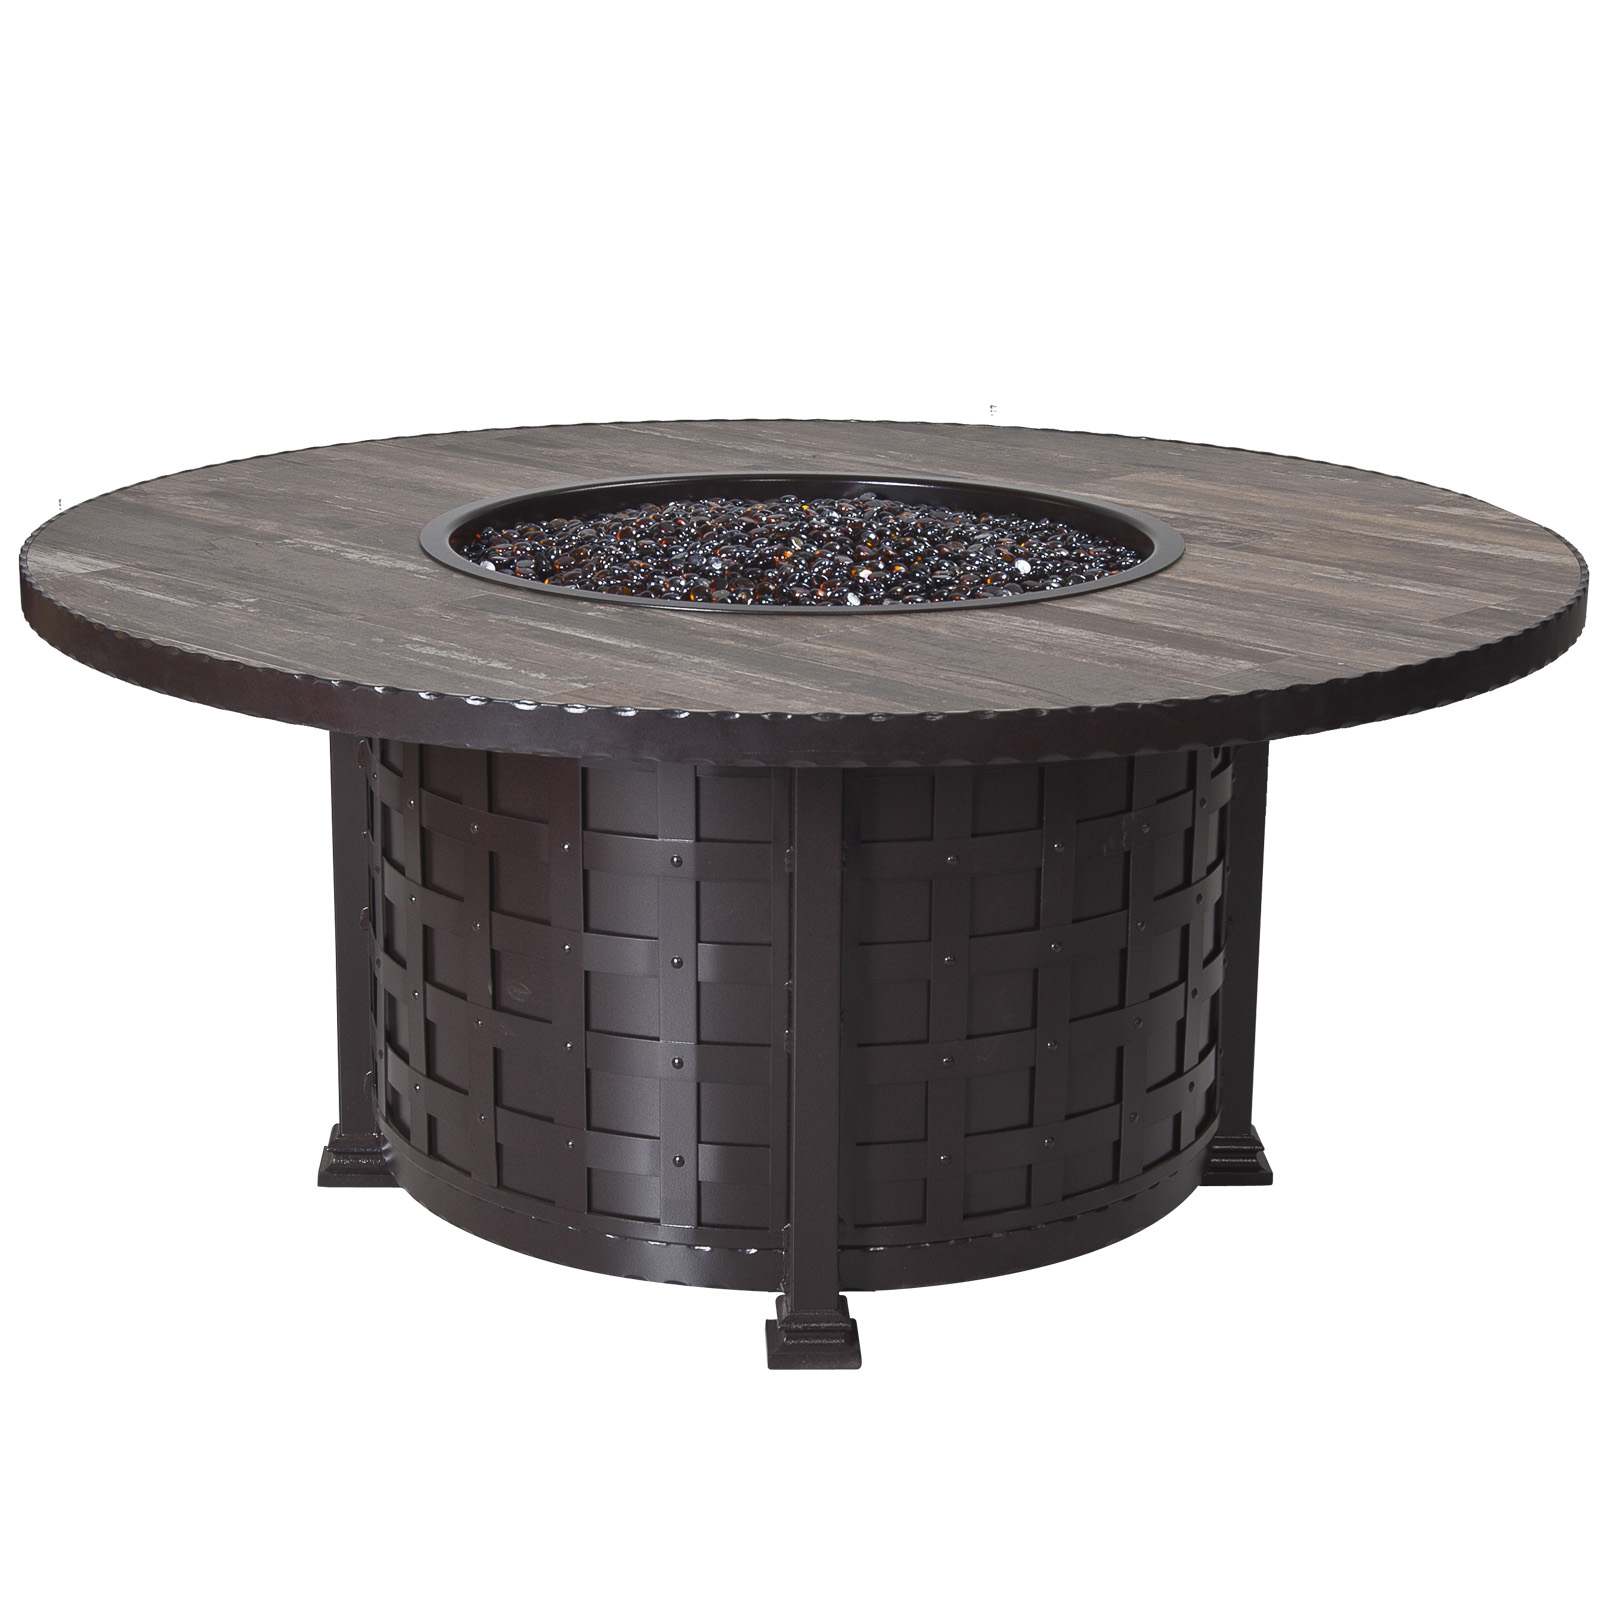 OW Lee Classico 54 inch Round Chat Height Fire Pit Table - 51-10C